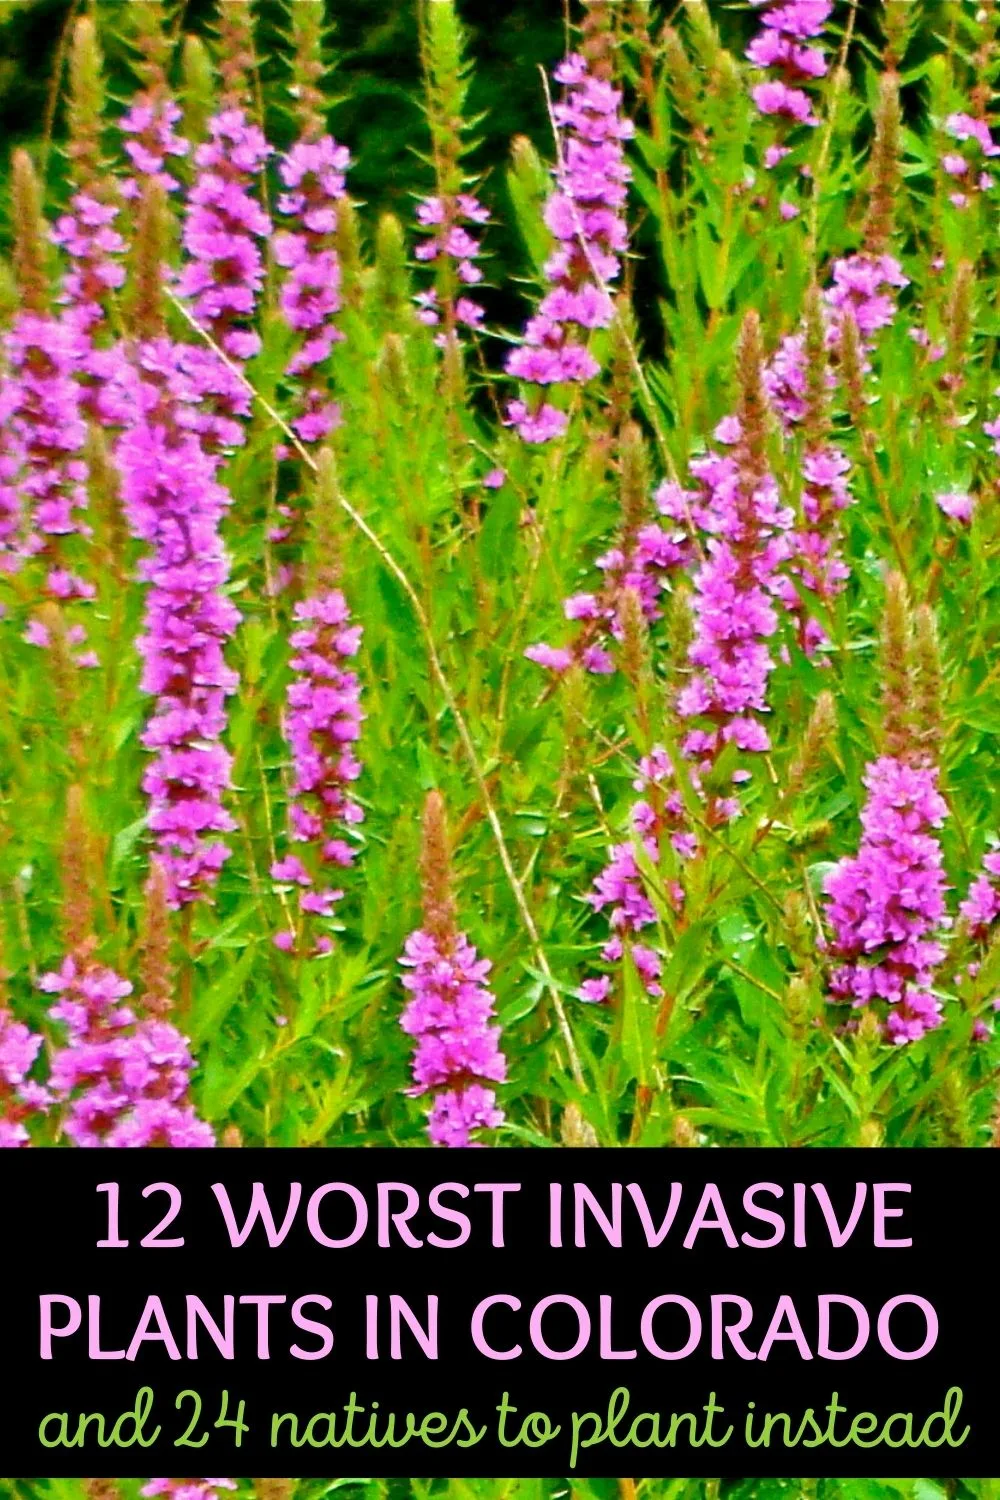 12 worst invasive plants in Colorado and 24 natives to plant instead